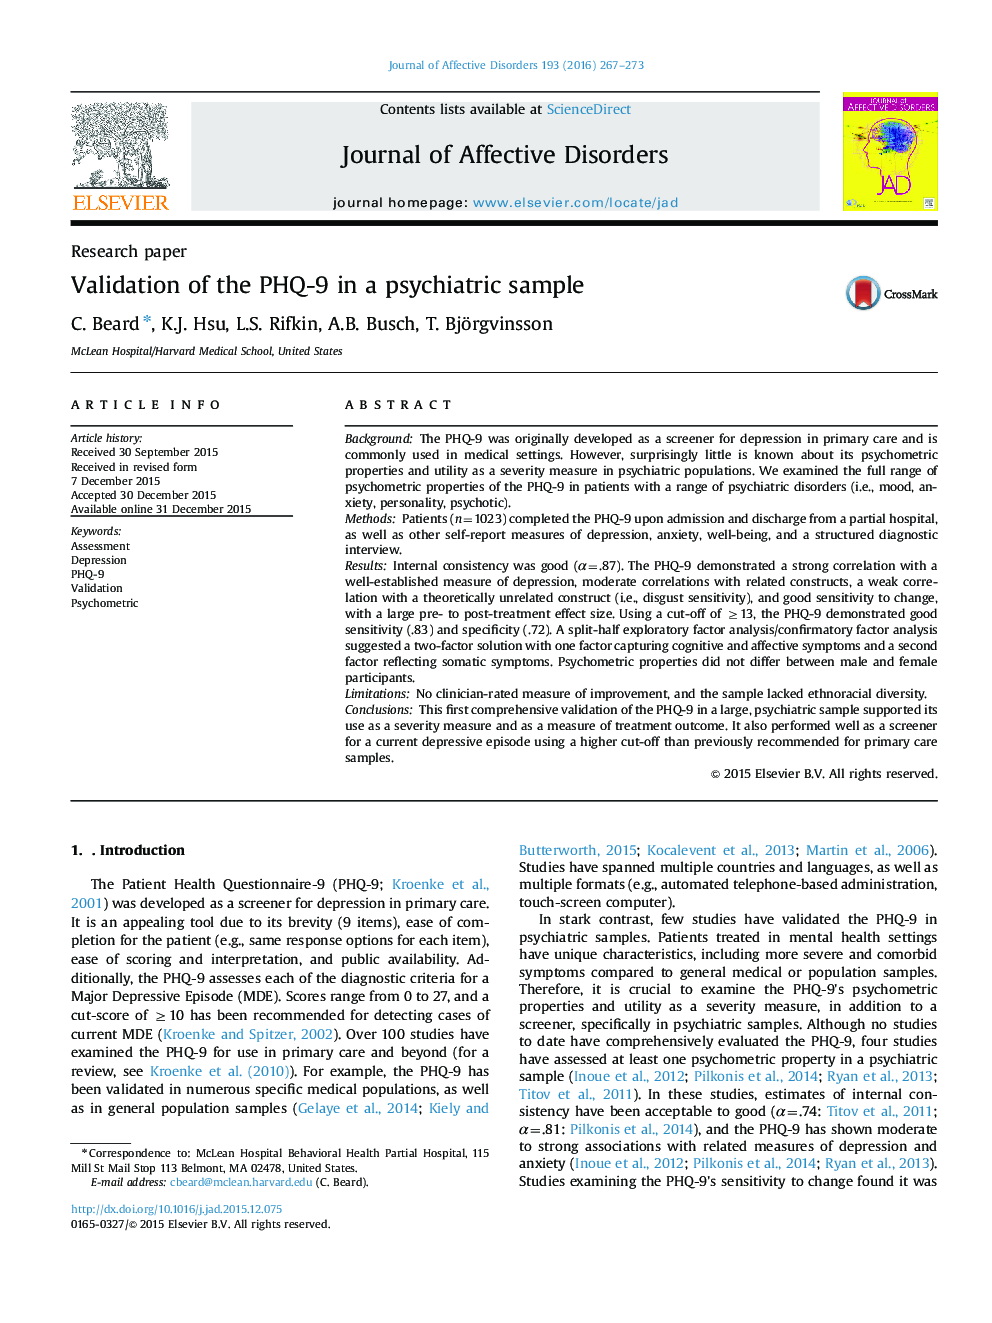 Validation of the PHQ-9 in a psychiatric sample